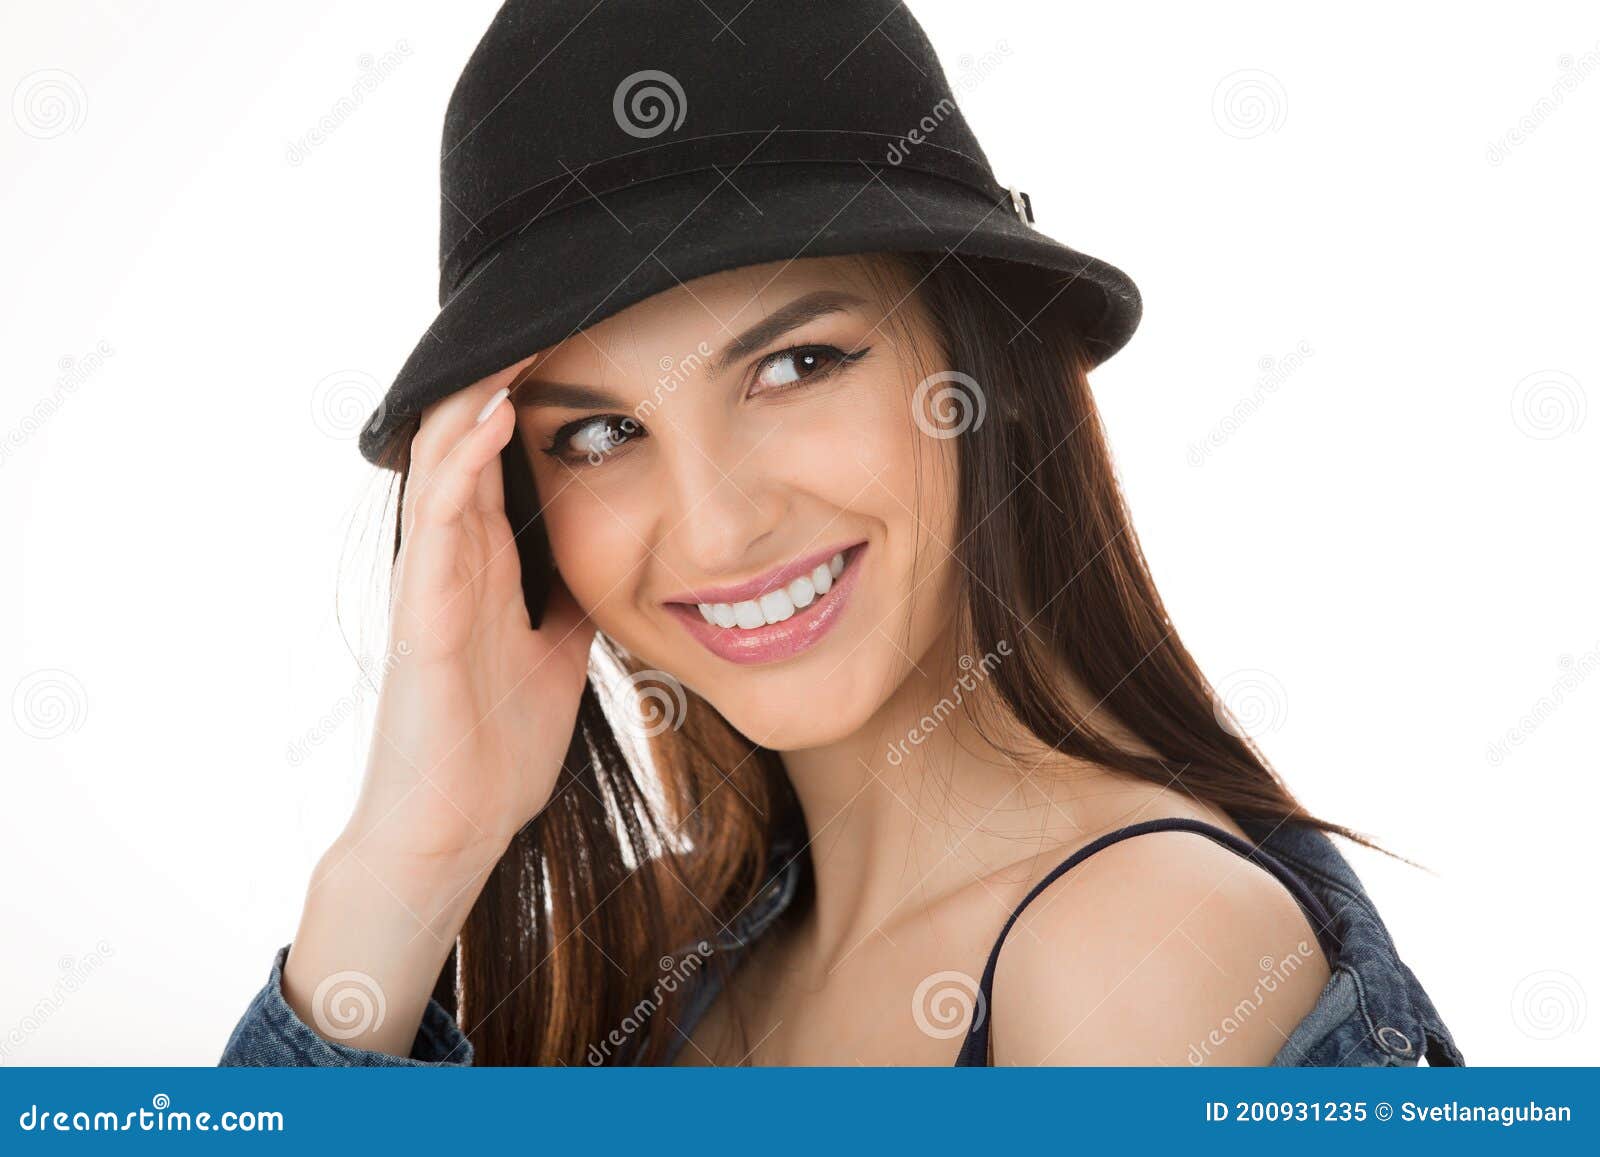 Young Beautiful Smiling Woman in Black Hat, Looking To the Side Smiling ...